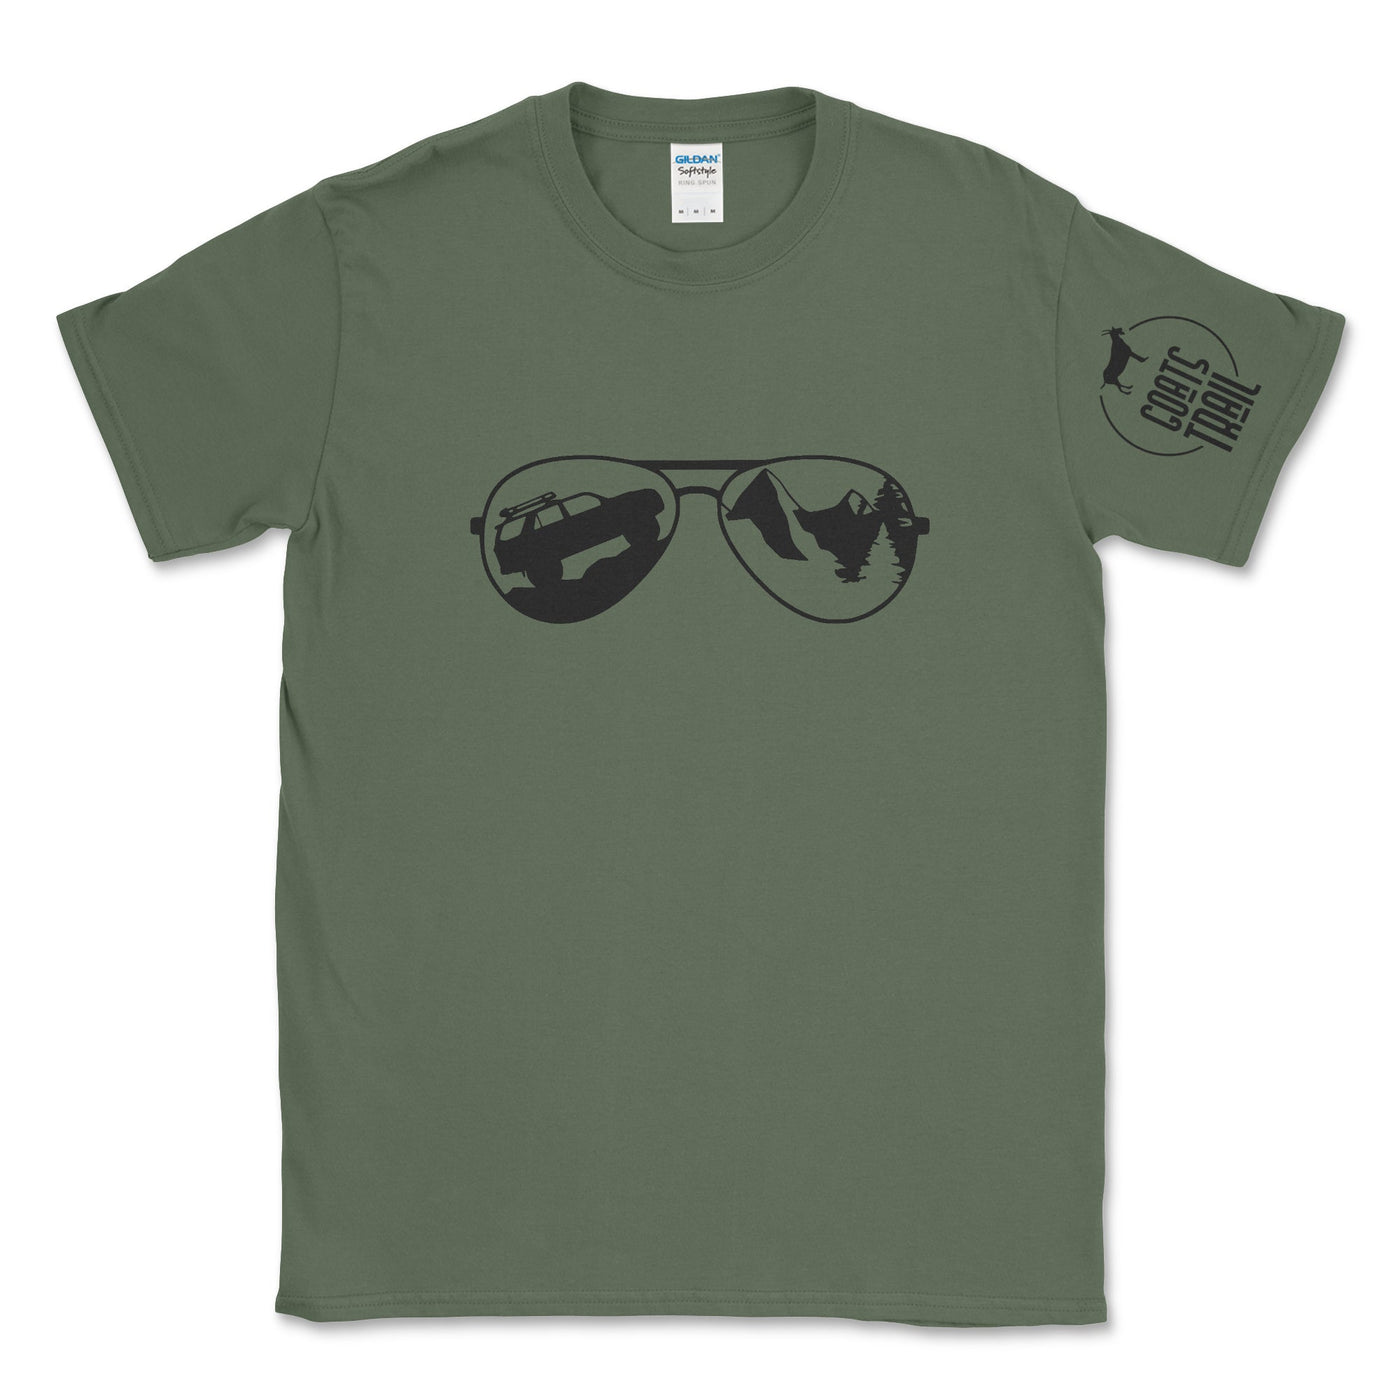 4Runner Sunglasses Graphic Tee - Goats Trail Off-Road Apparel Company